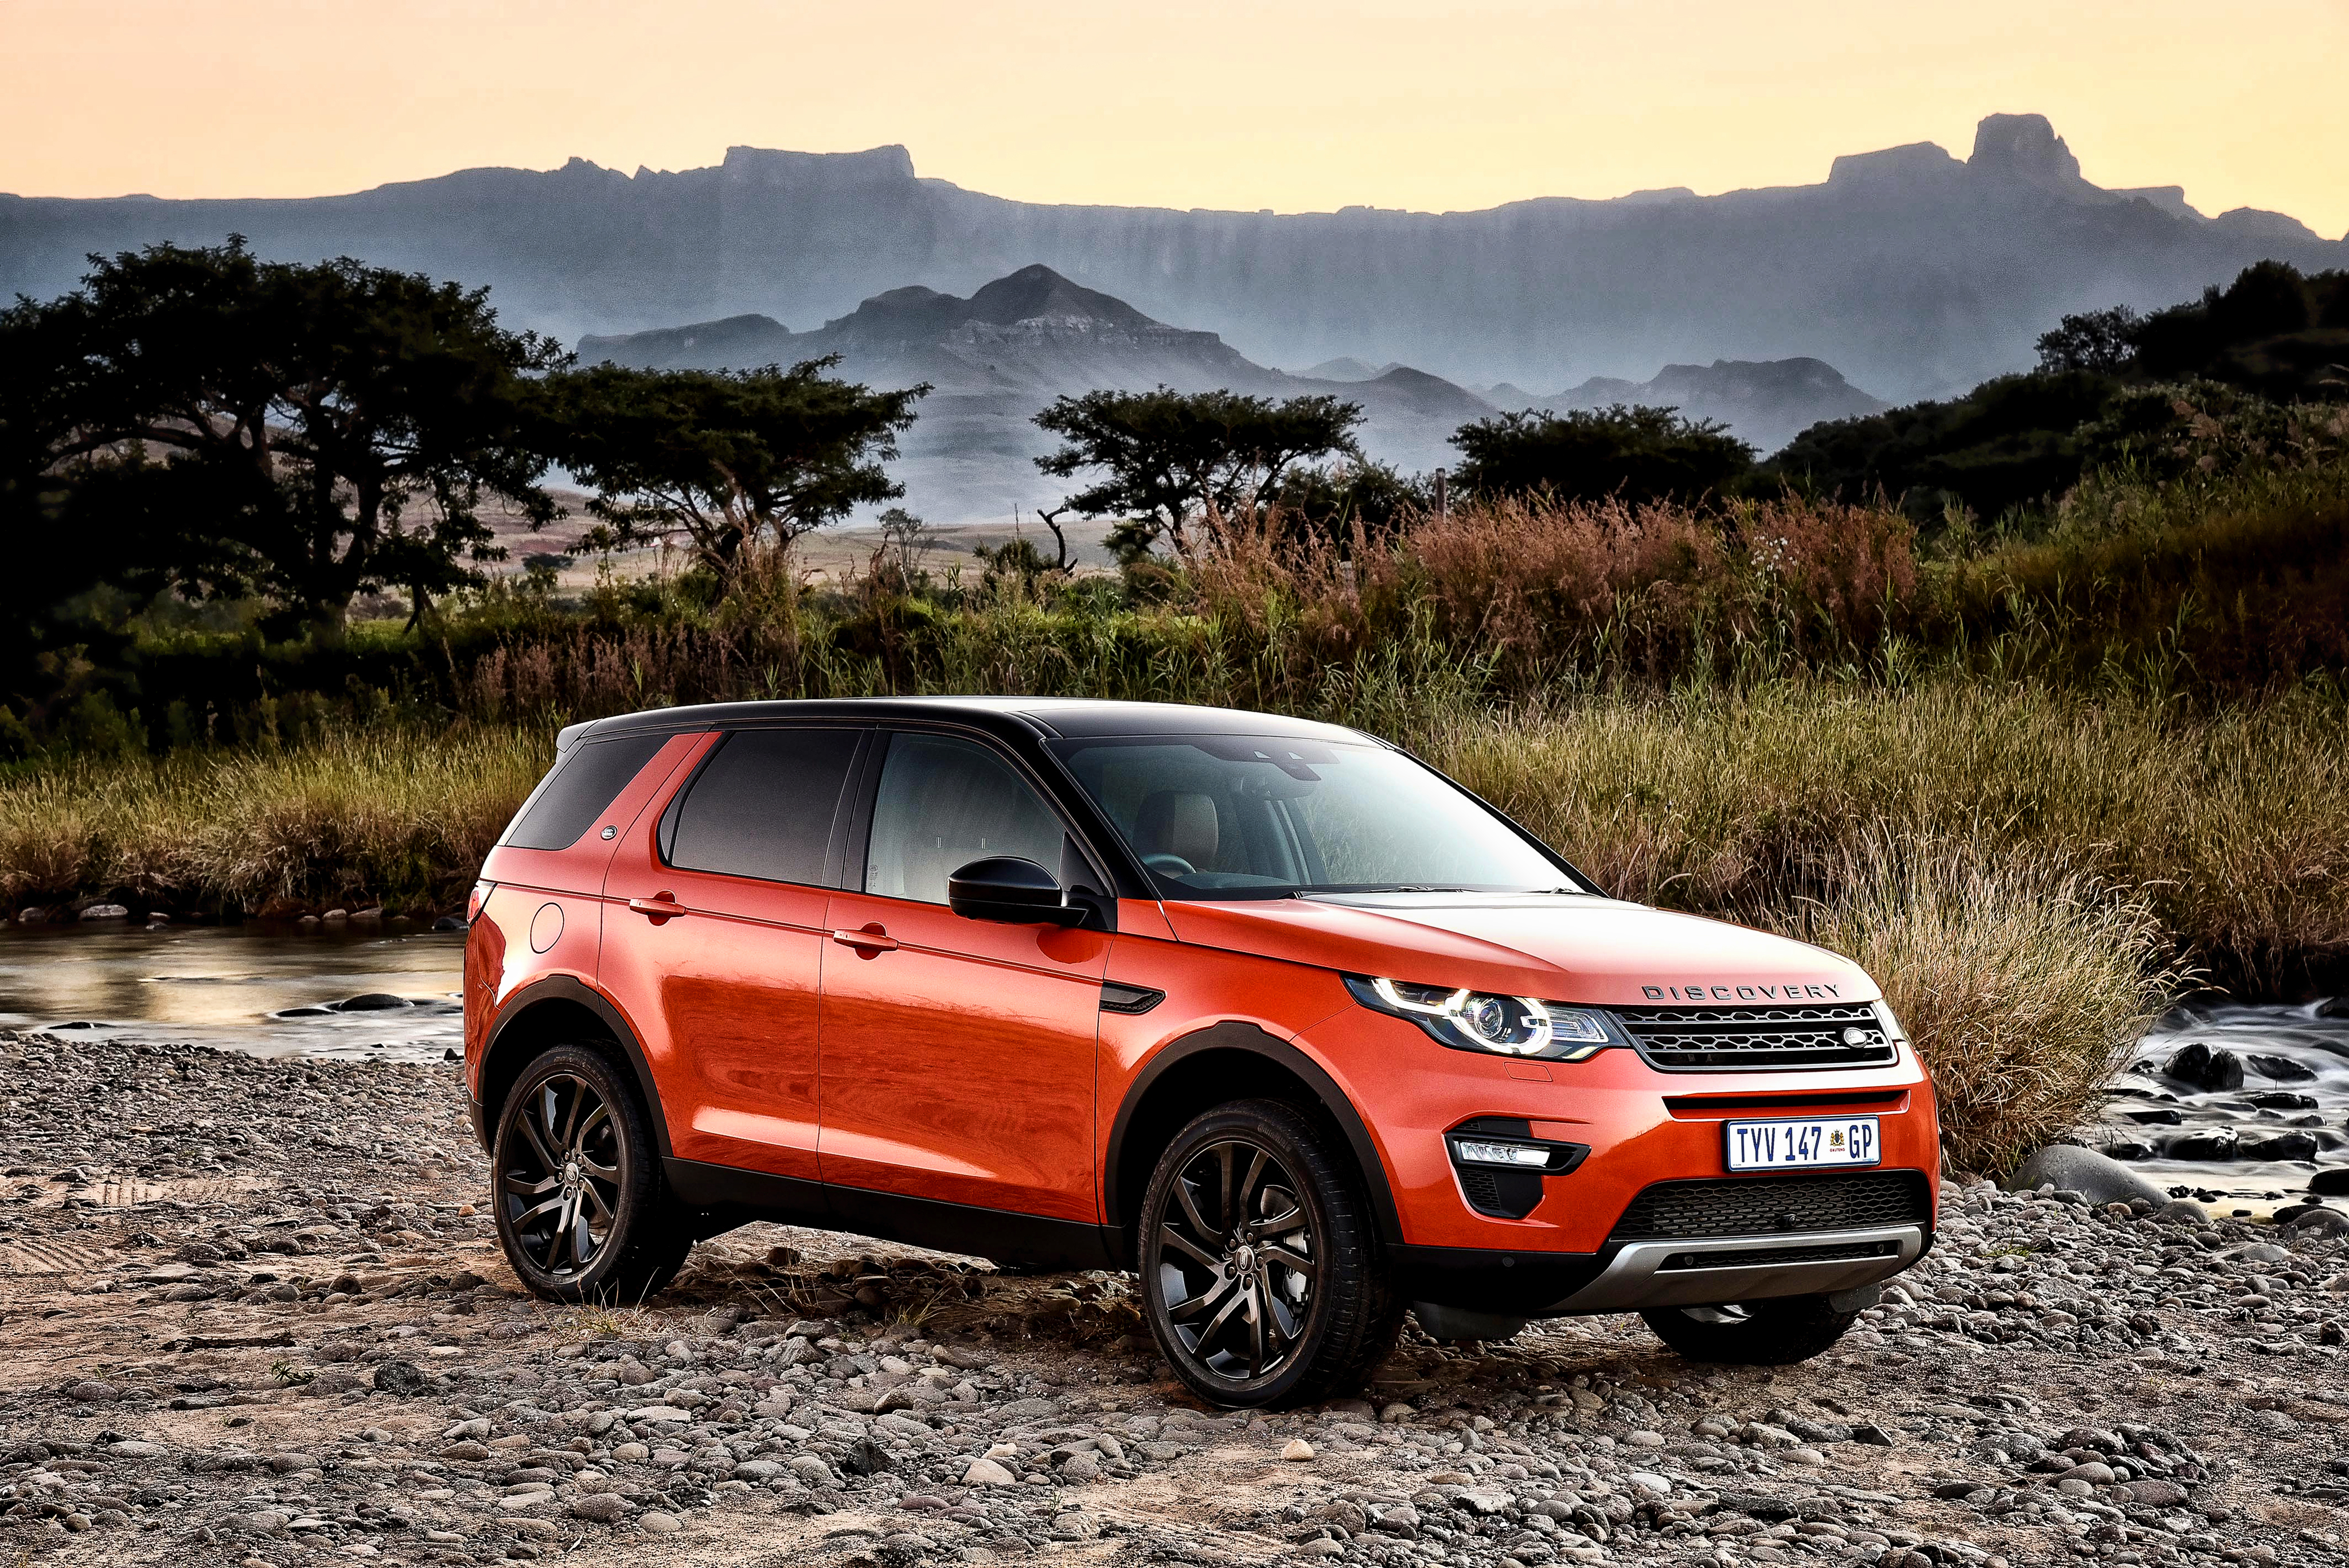 Discover l. Ленд Ровер Дискавери спорт 2015. Ленд Ровер Дискавери 2015. Land Rover Discovery Sport 2015. Лэнд Ровер Дискавери, 2015.